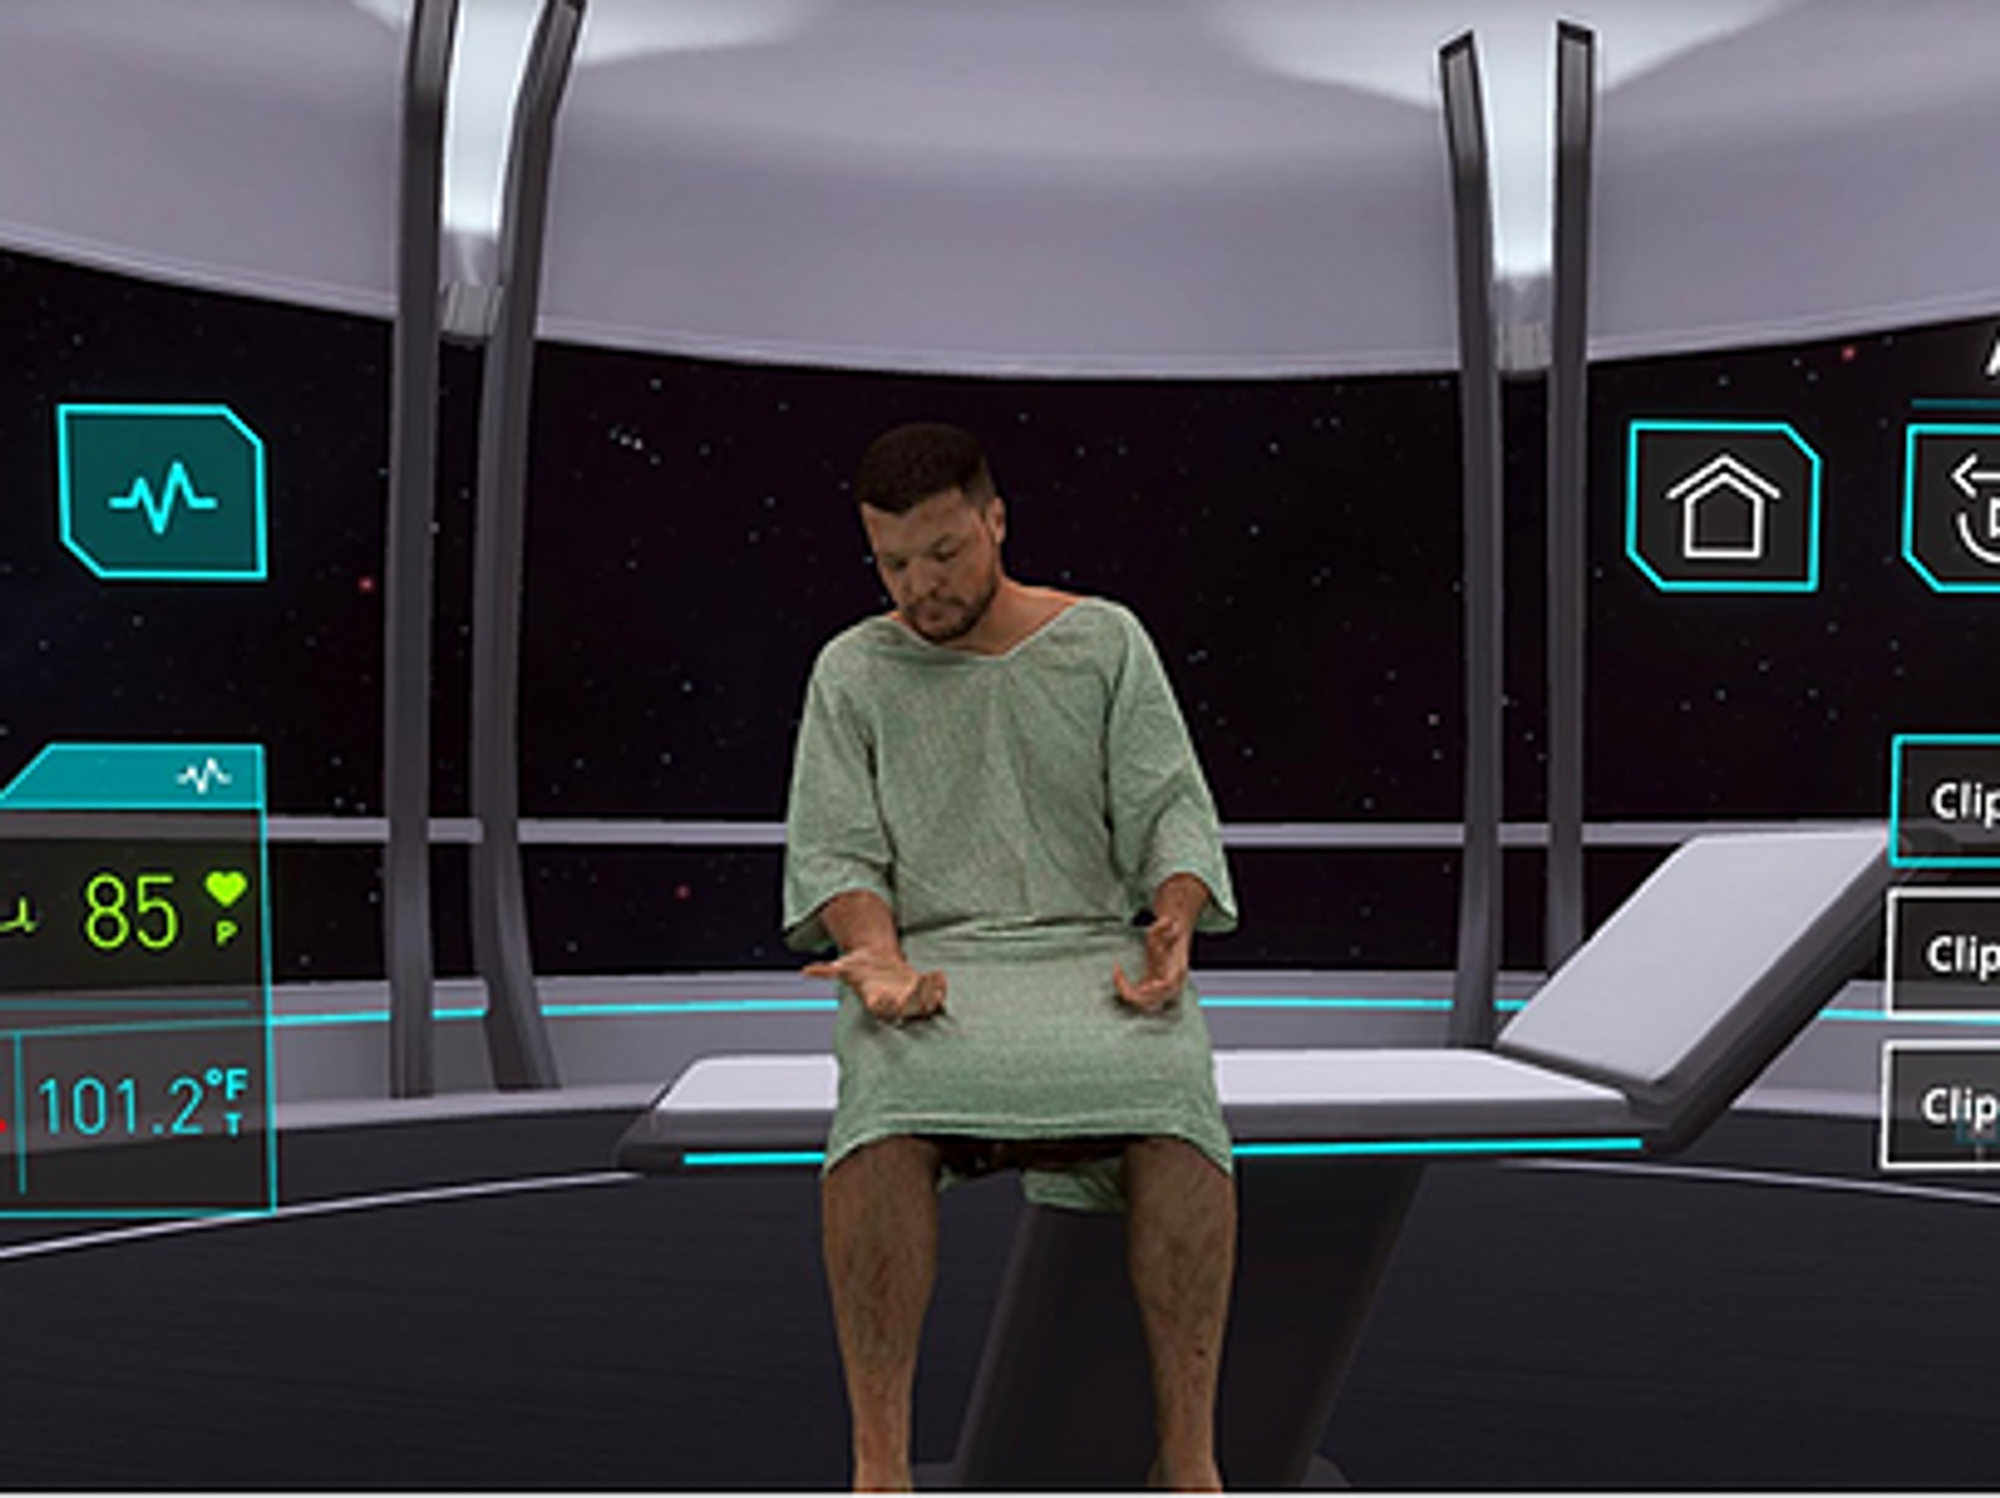 Venice-Based GigXR Gets Backing to Update Medical Training with Virtual Reality